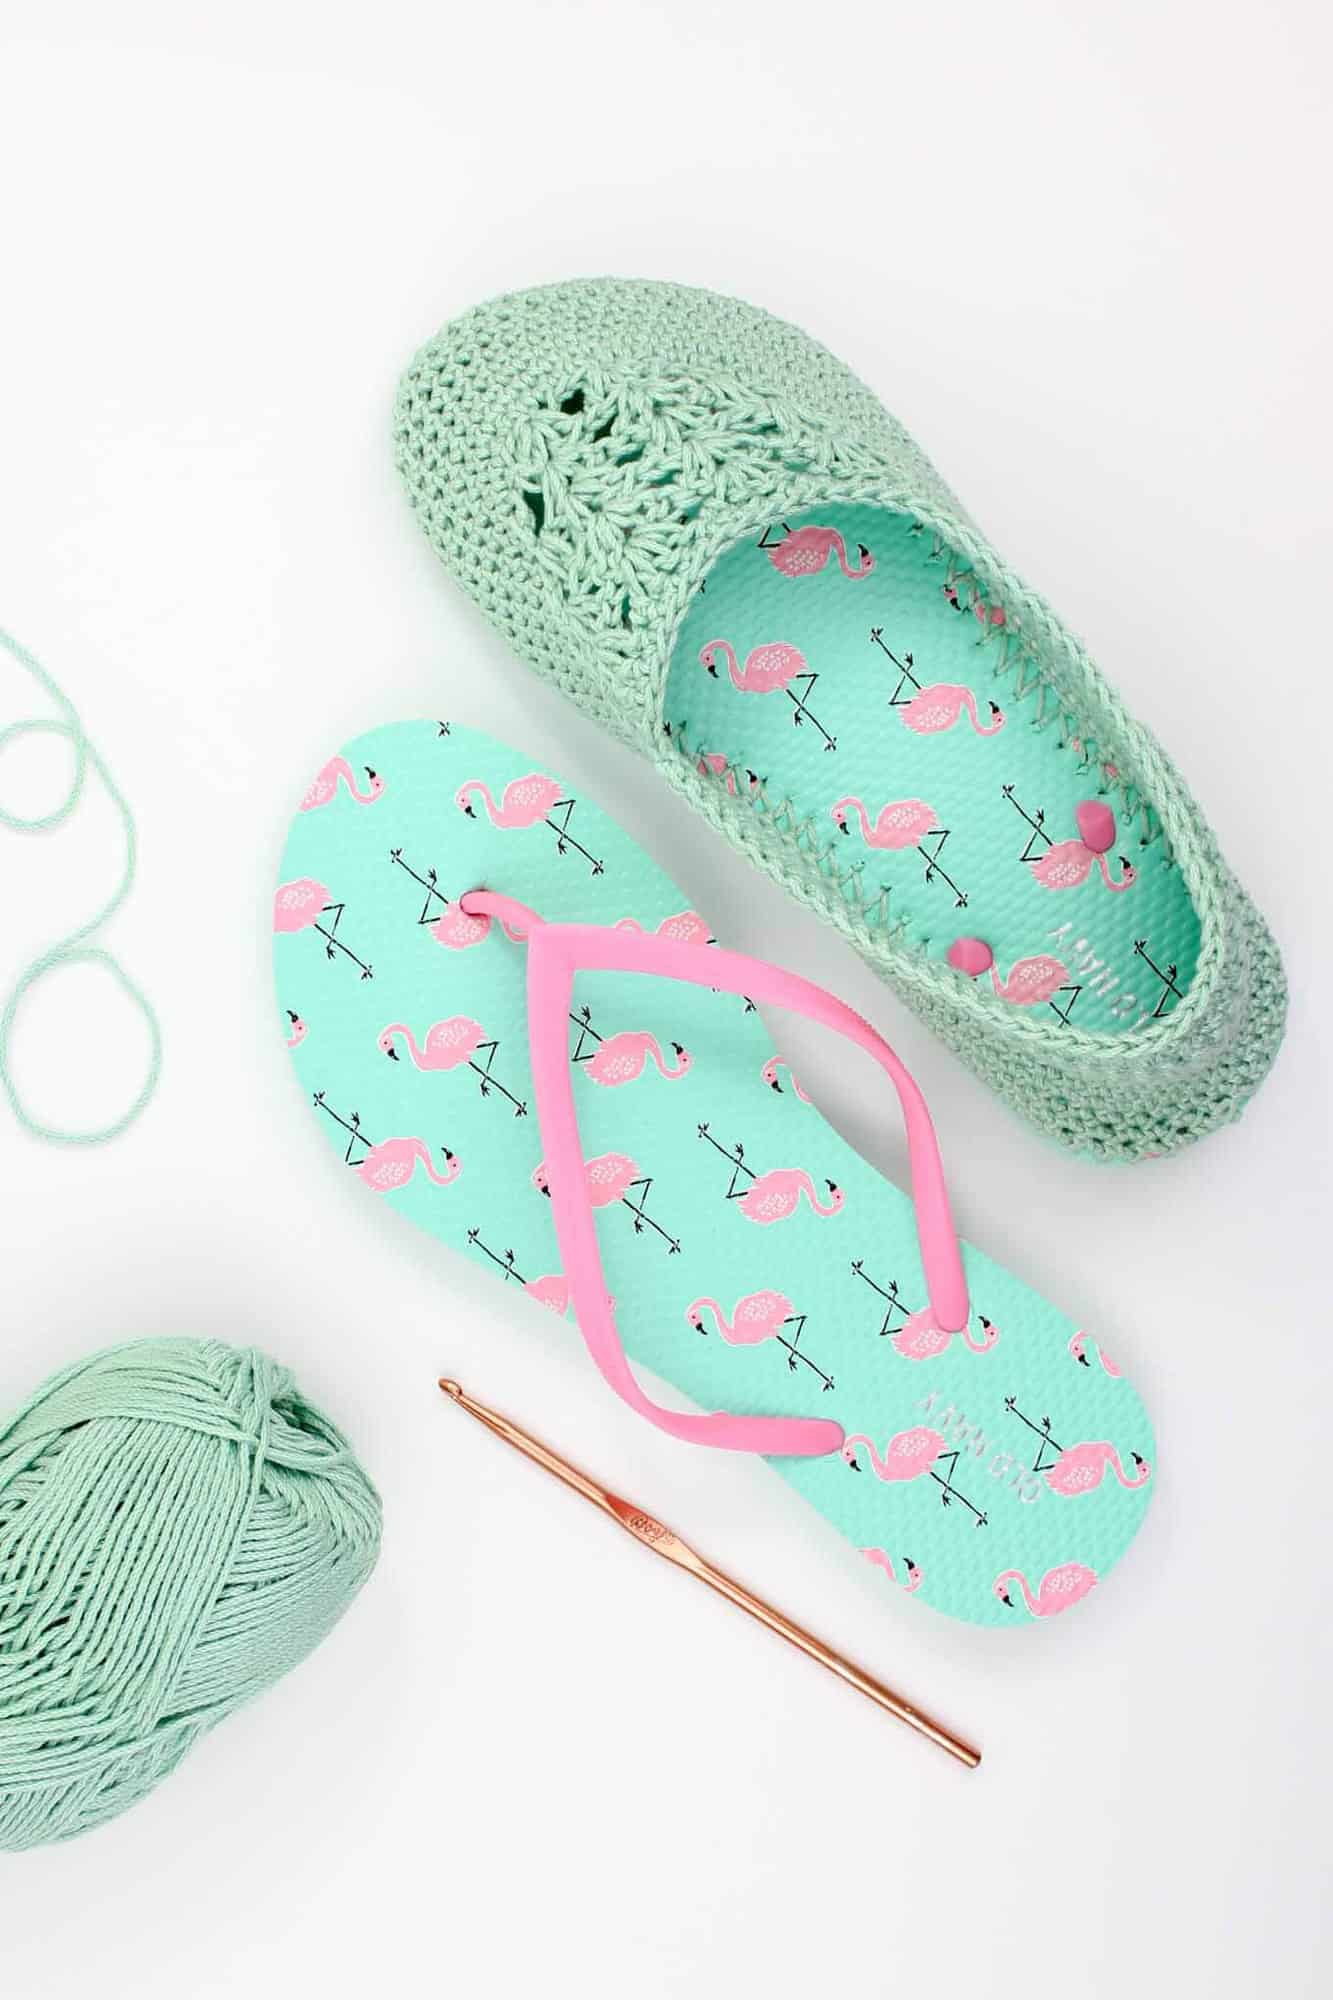 Crochet Slippers with Flip Flop Soles